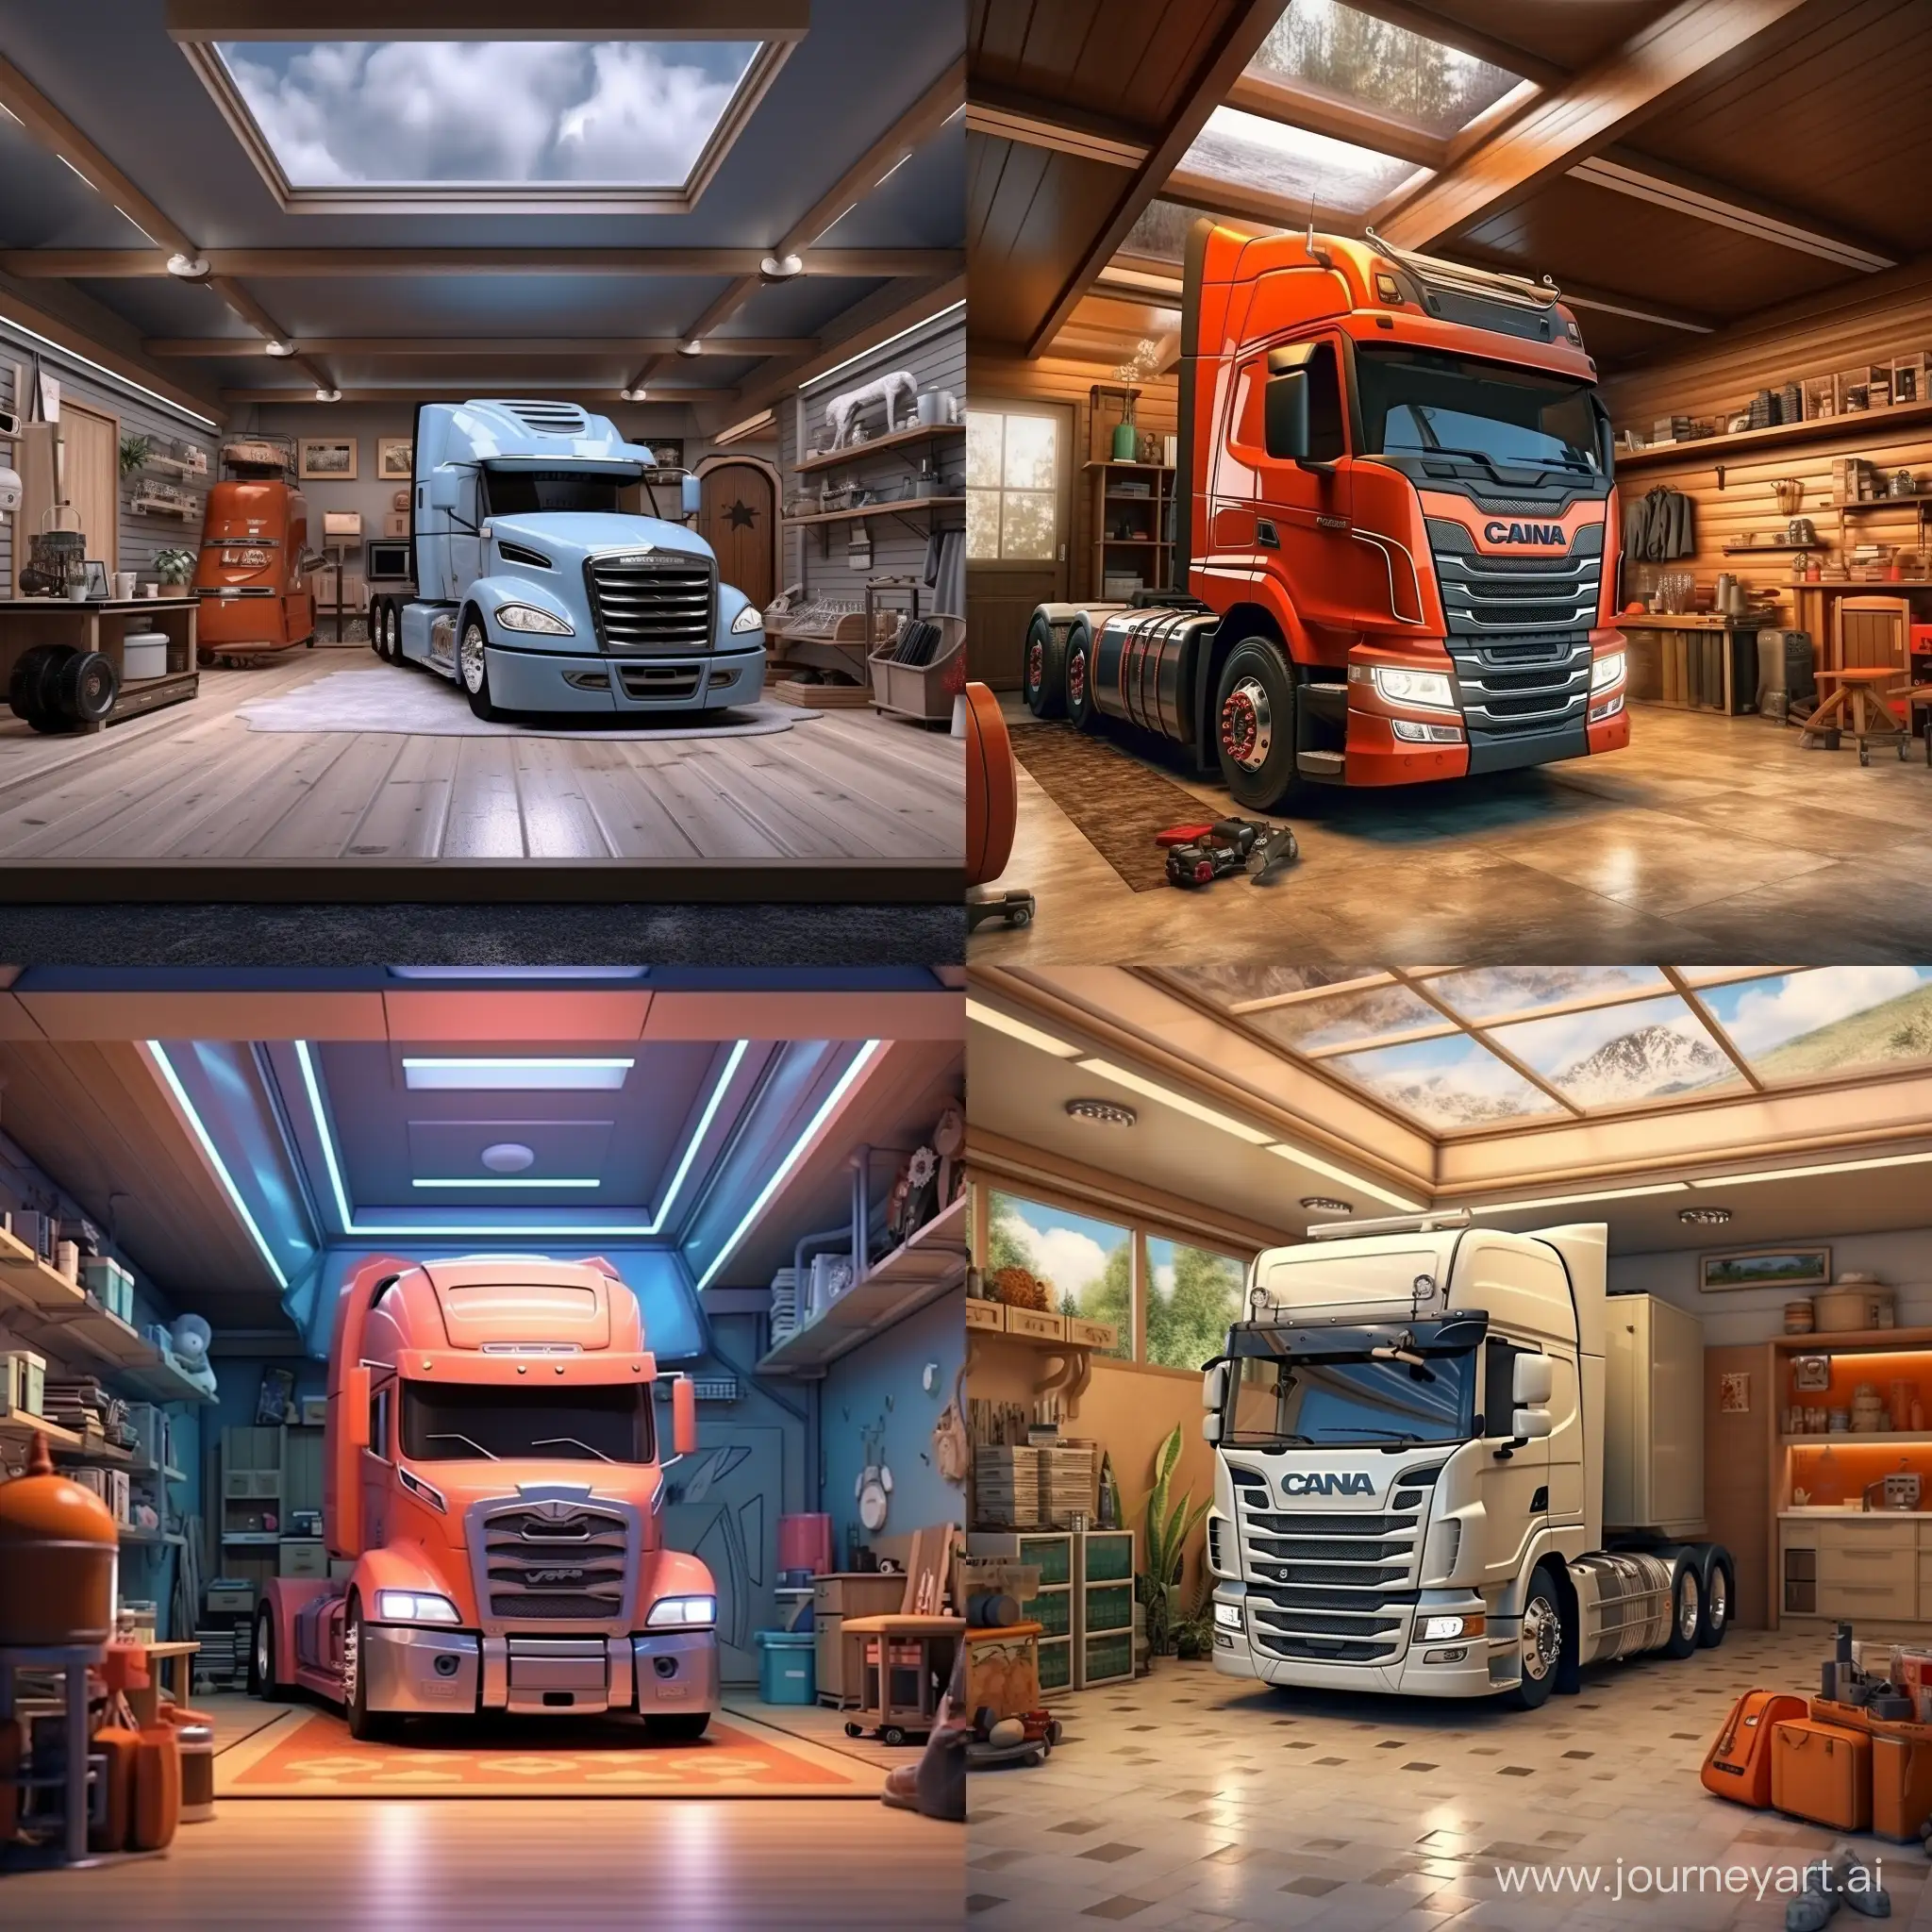 European-Tractor-Truck-in-Clean-Garage-with-SkyColored-Cabin